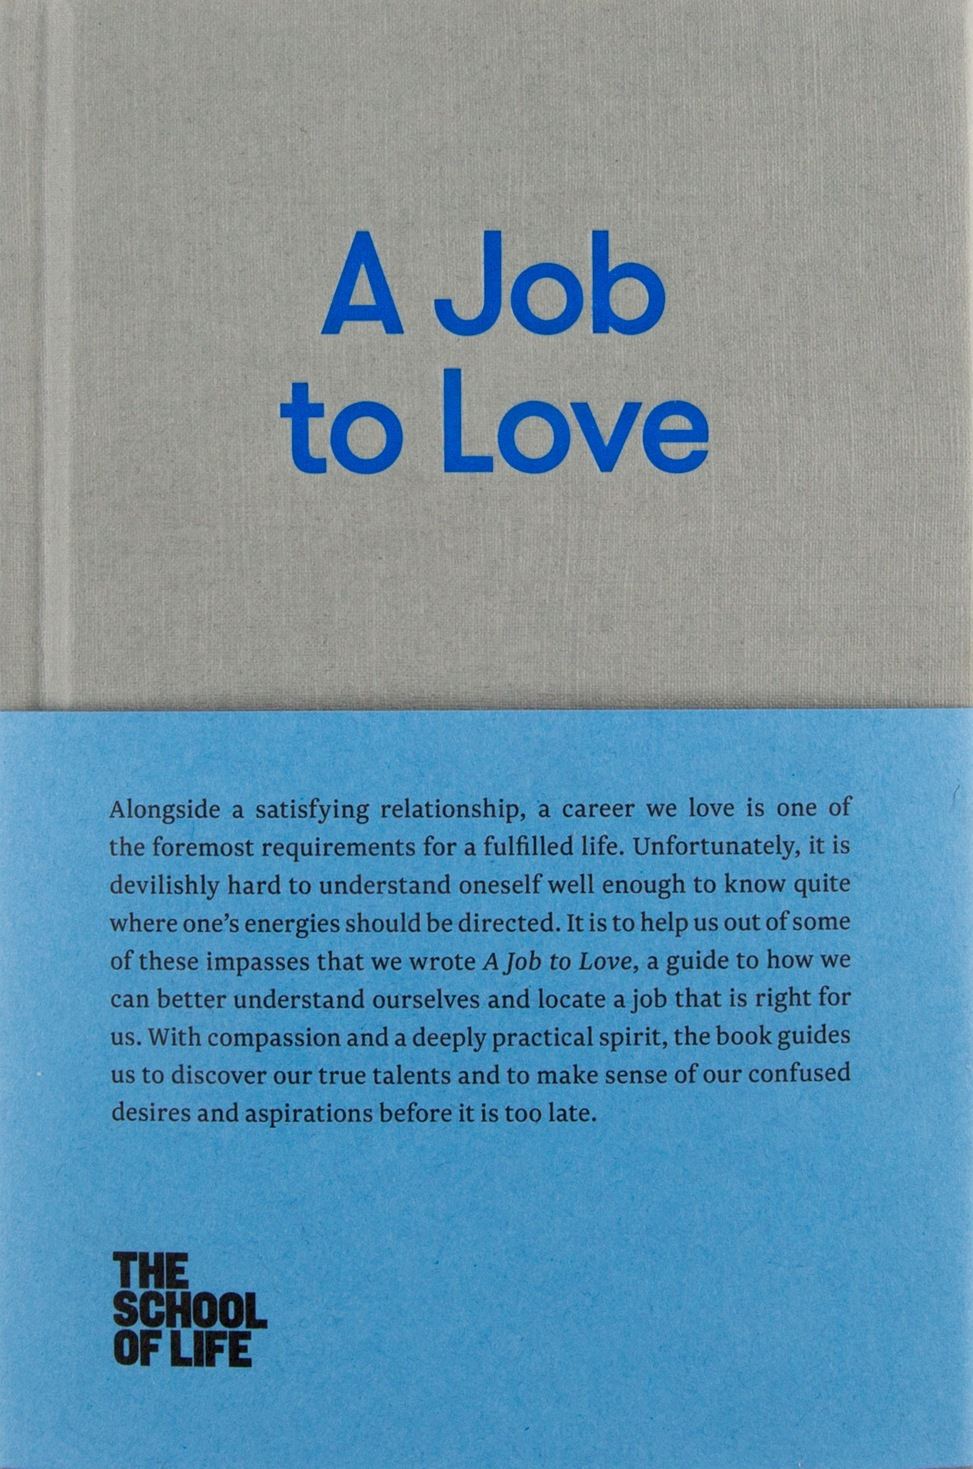 A Job to Love (SCHOOL OF LIFE) (HB)